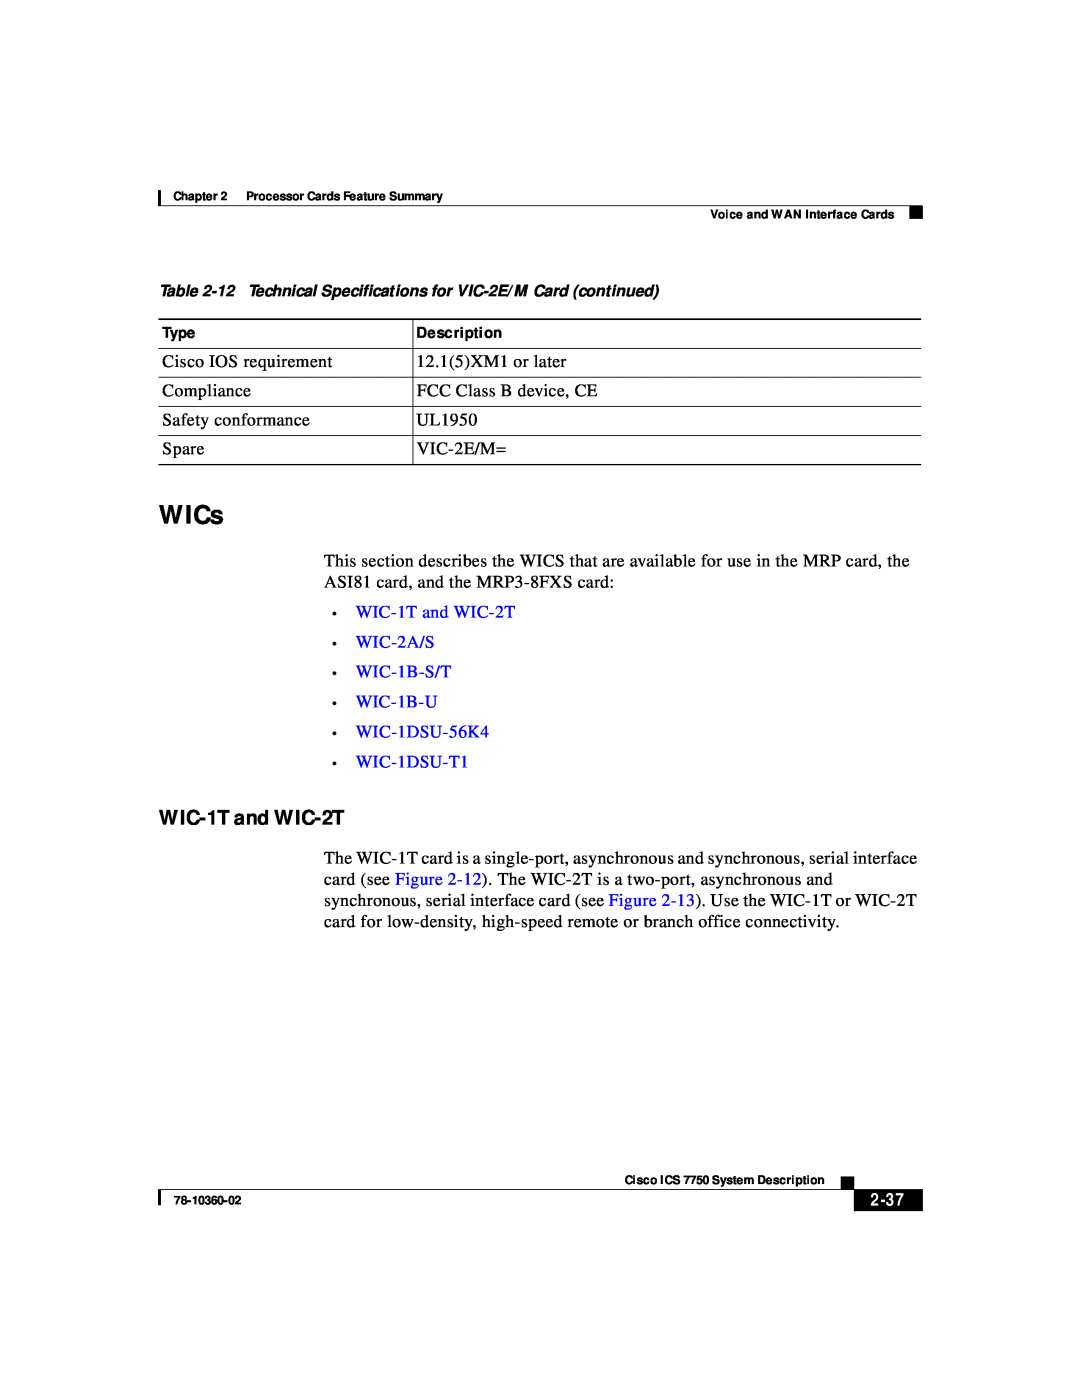 Cisco Systems ICS-7750 manual WICs, WIC-1T and WIC-2T WIC-2A/S WIC-1B-S/T WIC-1B-U WIC-1DSU-56K4, WIC-1DSU-T1, 2-37 